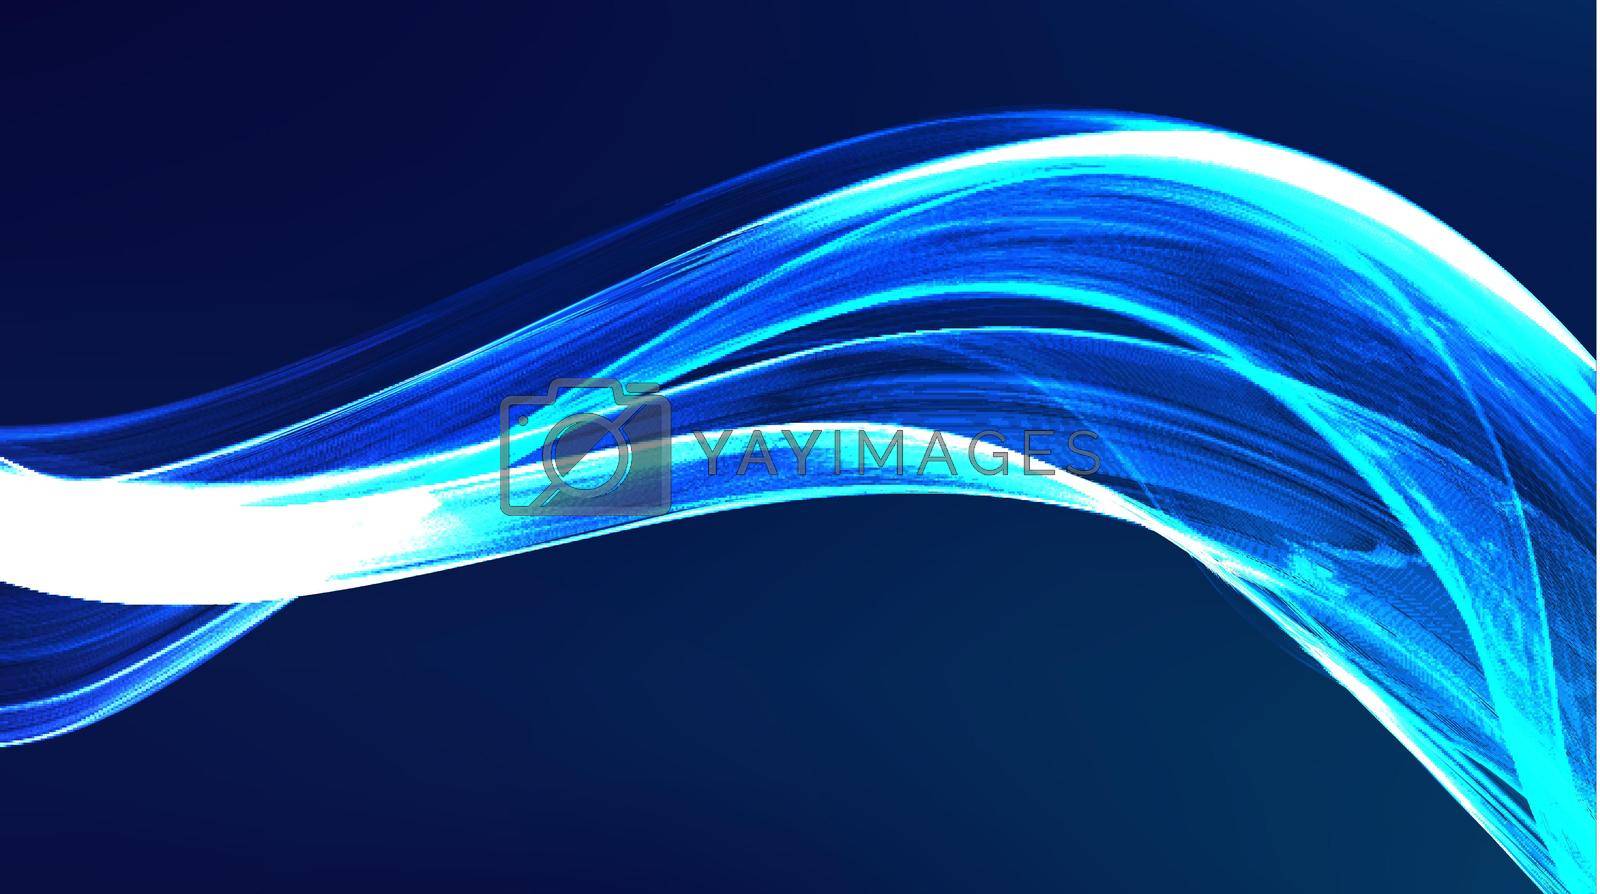 Royalty free image of Tech futuristic 3d blue wave. Abstract blue light effect background. Modern tech music design. by DmytroRazinkov